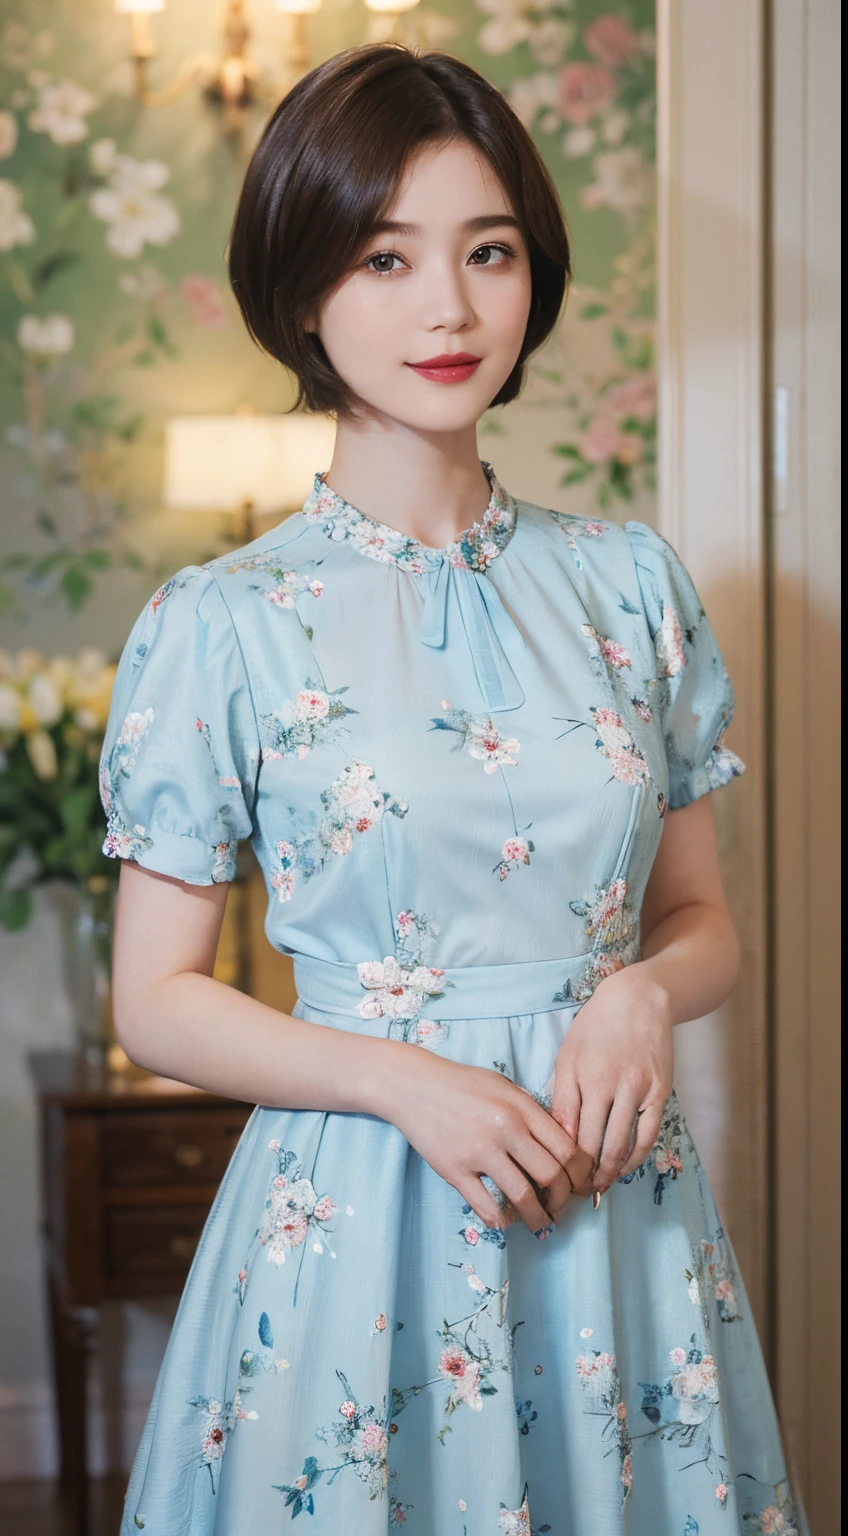 129
(a 20 yo woman,is standing), (A hyper-realistic), (high-level image quality), ((beautiful hairstyle 46)), ((short-hair:1.46)), (Gentle smile), (brest:1.1), (lipsticks), (florals), (Large room), (florals), (painterly)